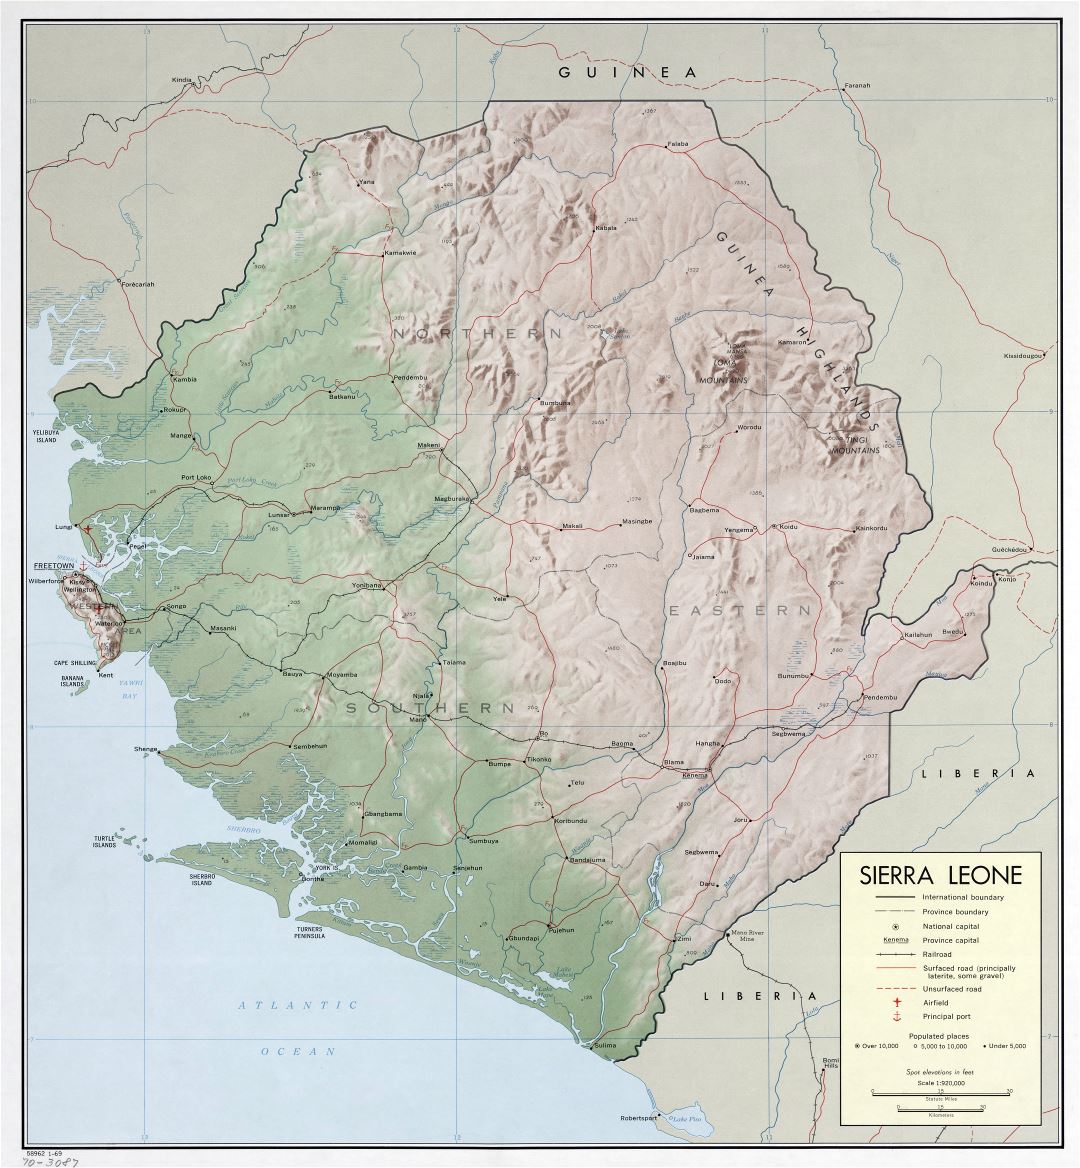 Large scale detailed political and administrative map of Sierra Leone with relief, roads, railroads, cities, ports and airports - 1969